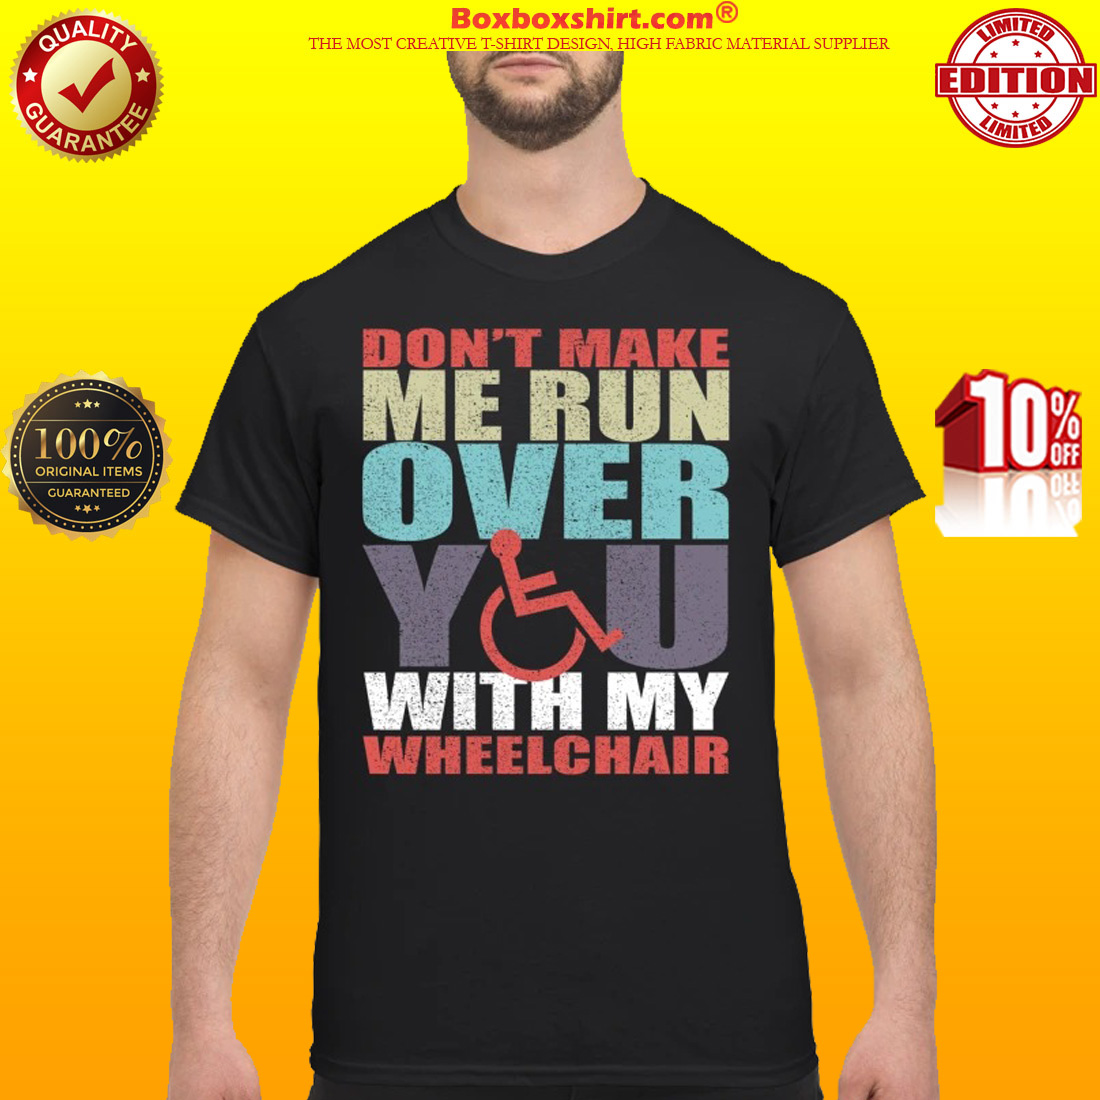 Don't make me run over you with my wheelchair shirt